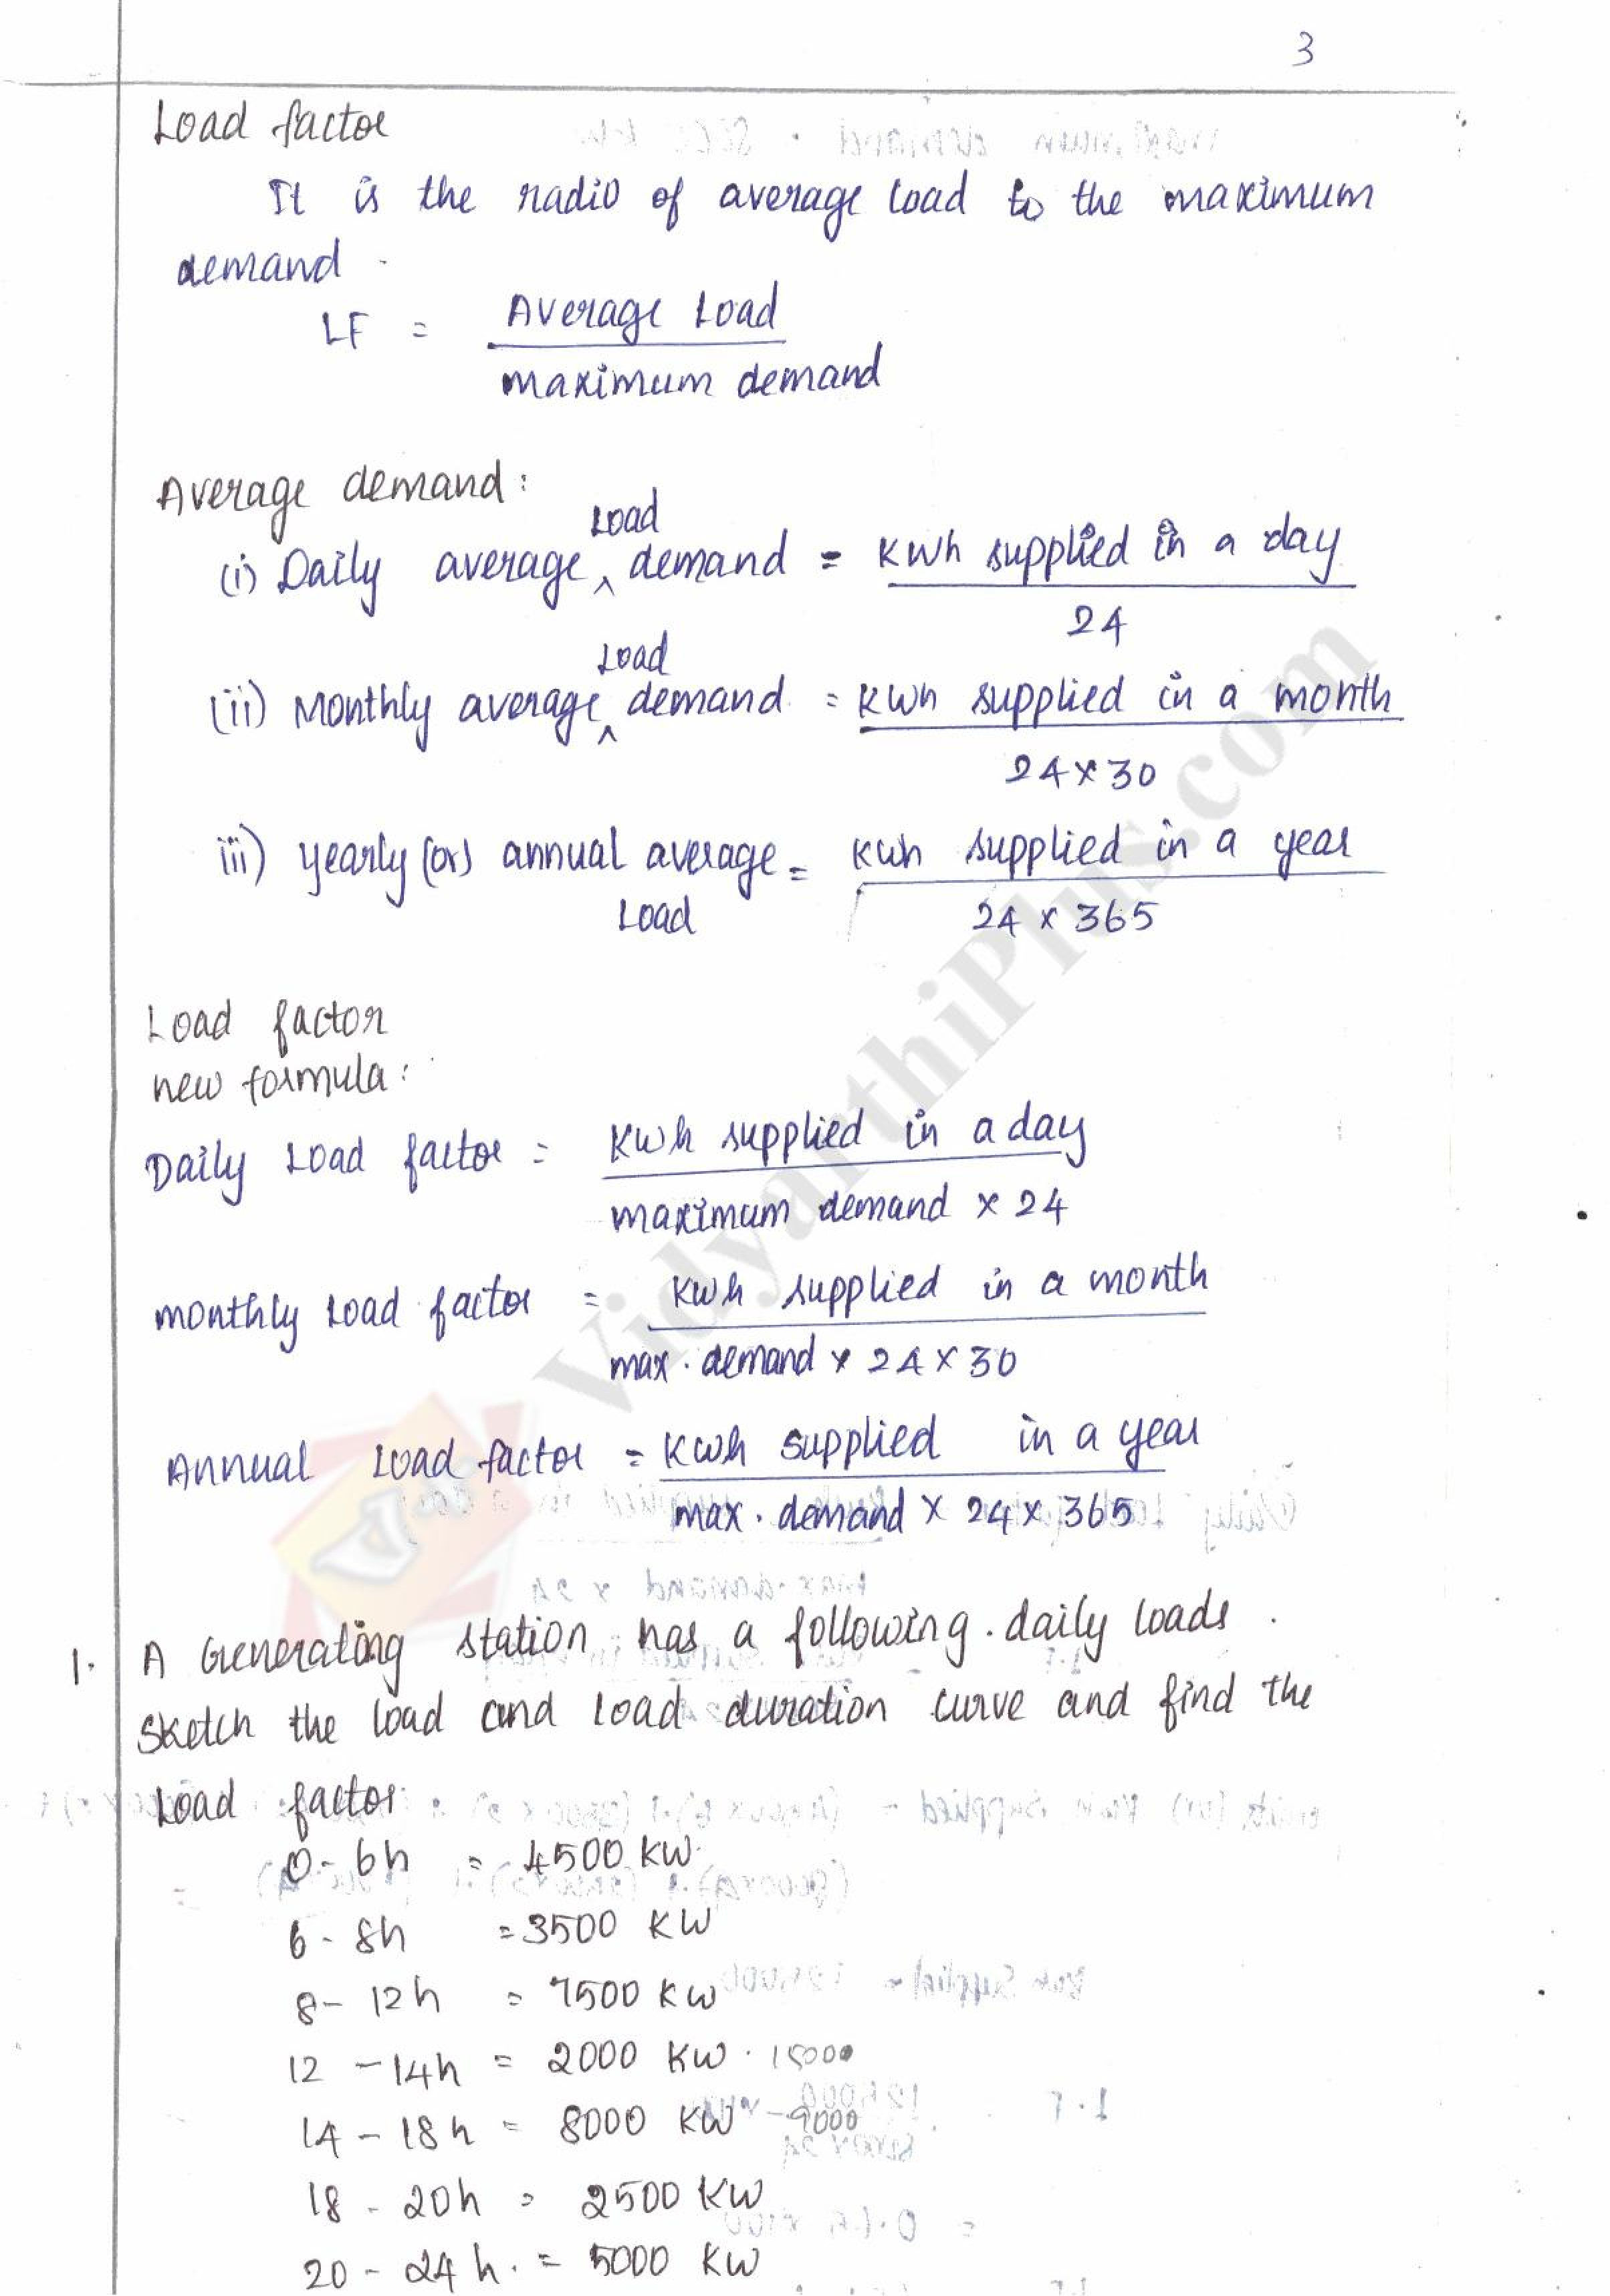 Power System Operation And Control Premium Lecture Notes - Lavanya Edition